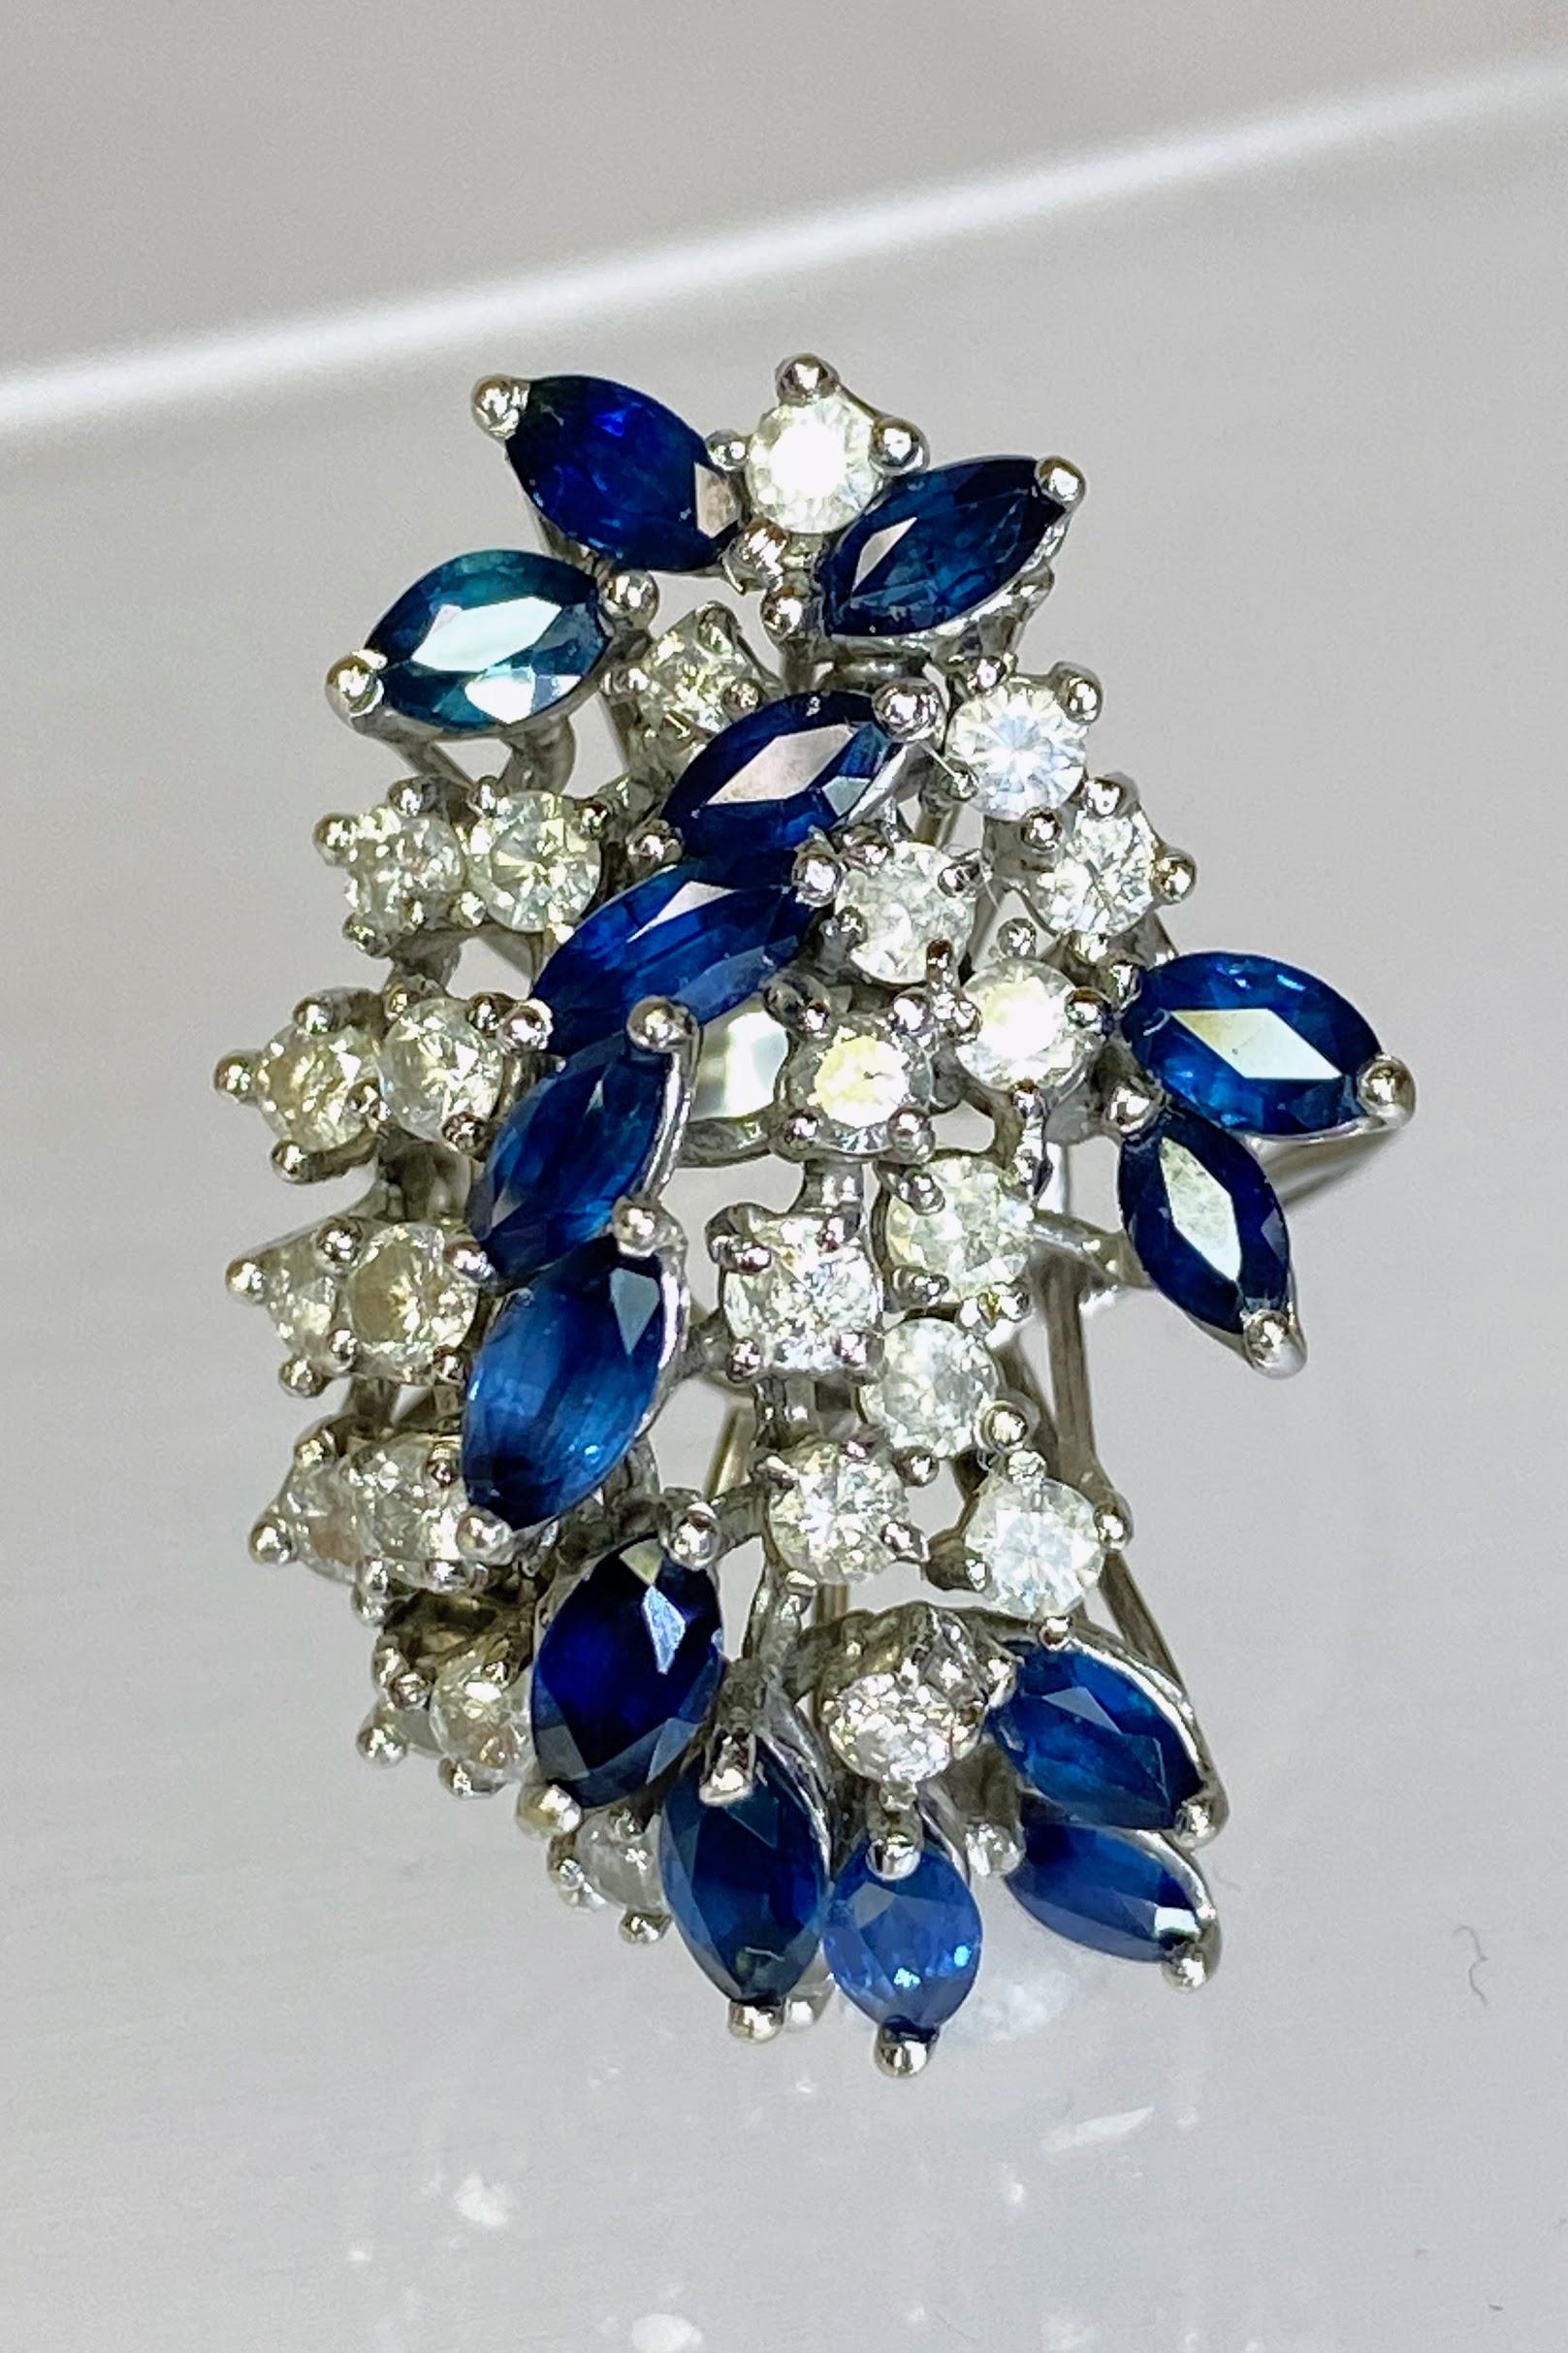 14K White Gold Diamond & Blue Sapphire 4.5 Carat Waterfall Cluster Ring Size 7.5 For Sale 2